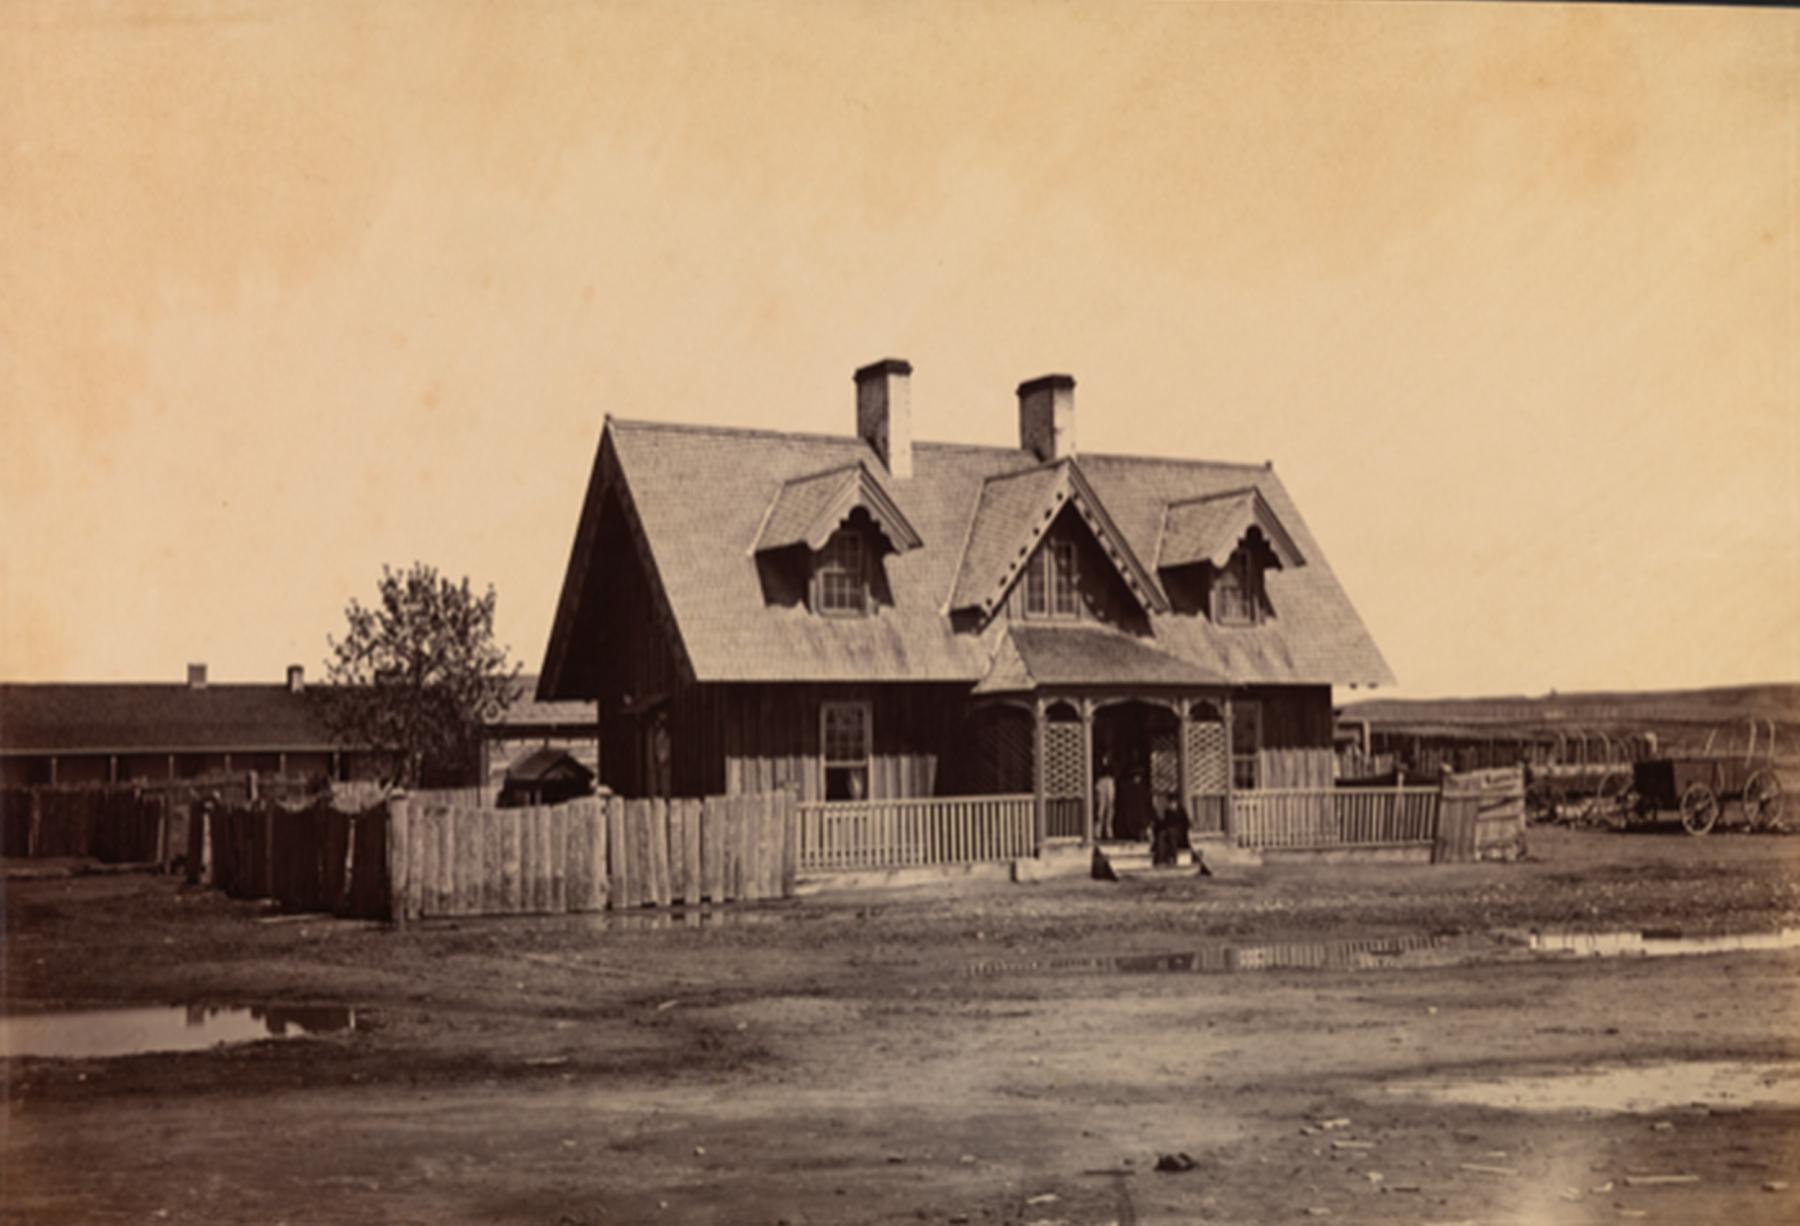 The extravagant, new residence of “Colonel” William G. Bullock, sutler and trader at Fort Laramie, 1868. Sherman collection of Gardner photographs, NMAI.